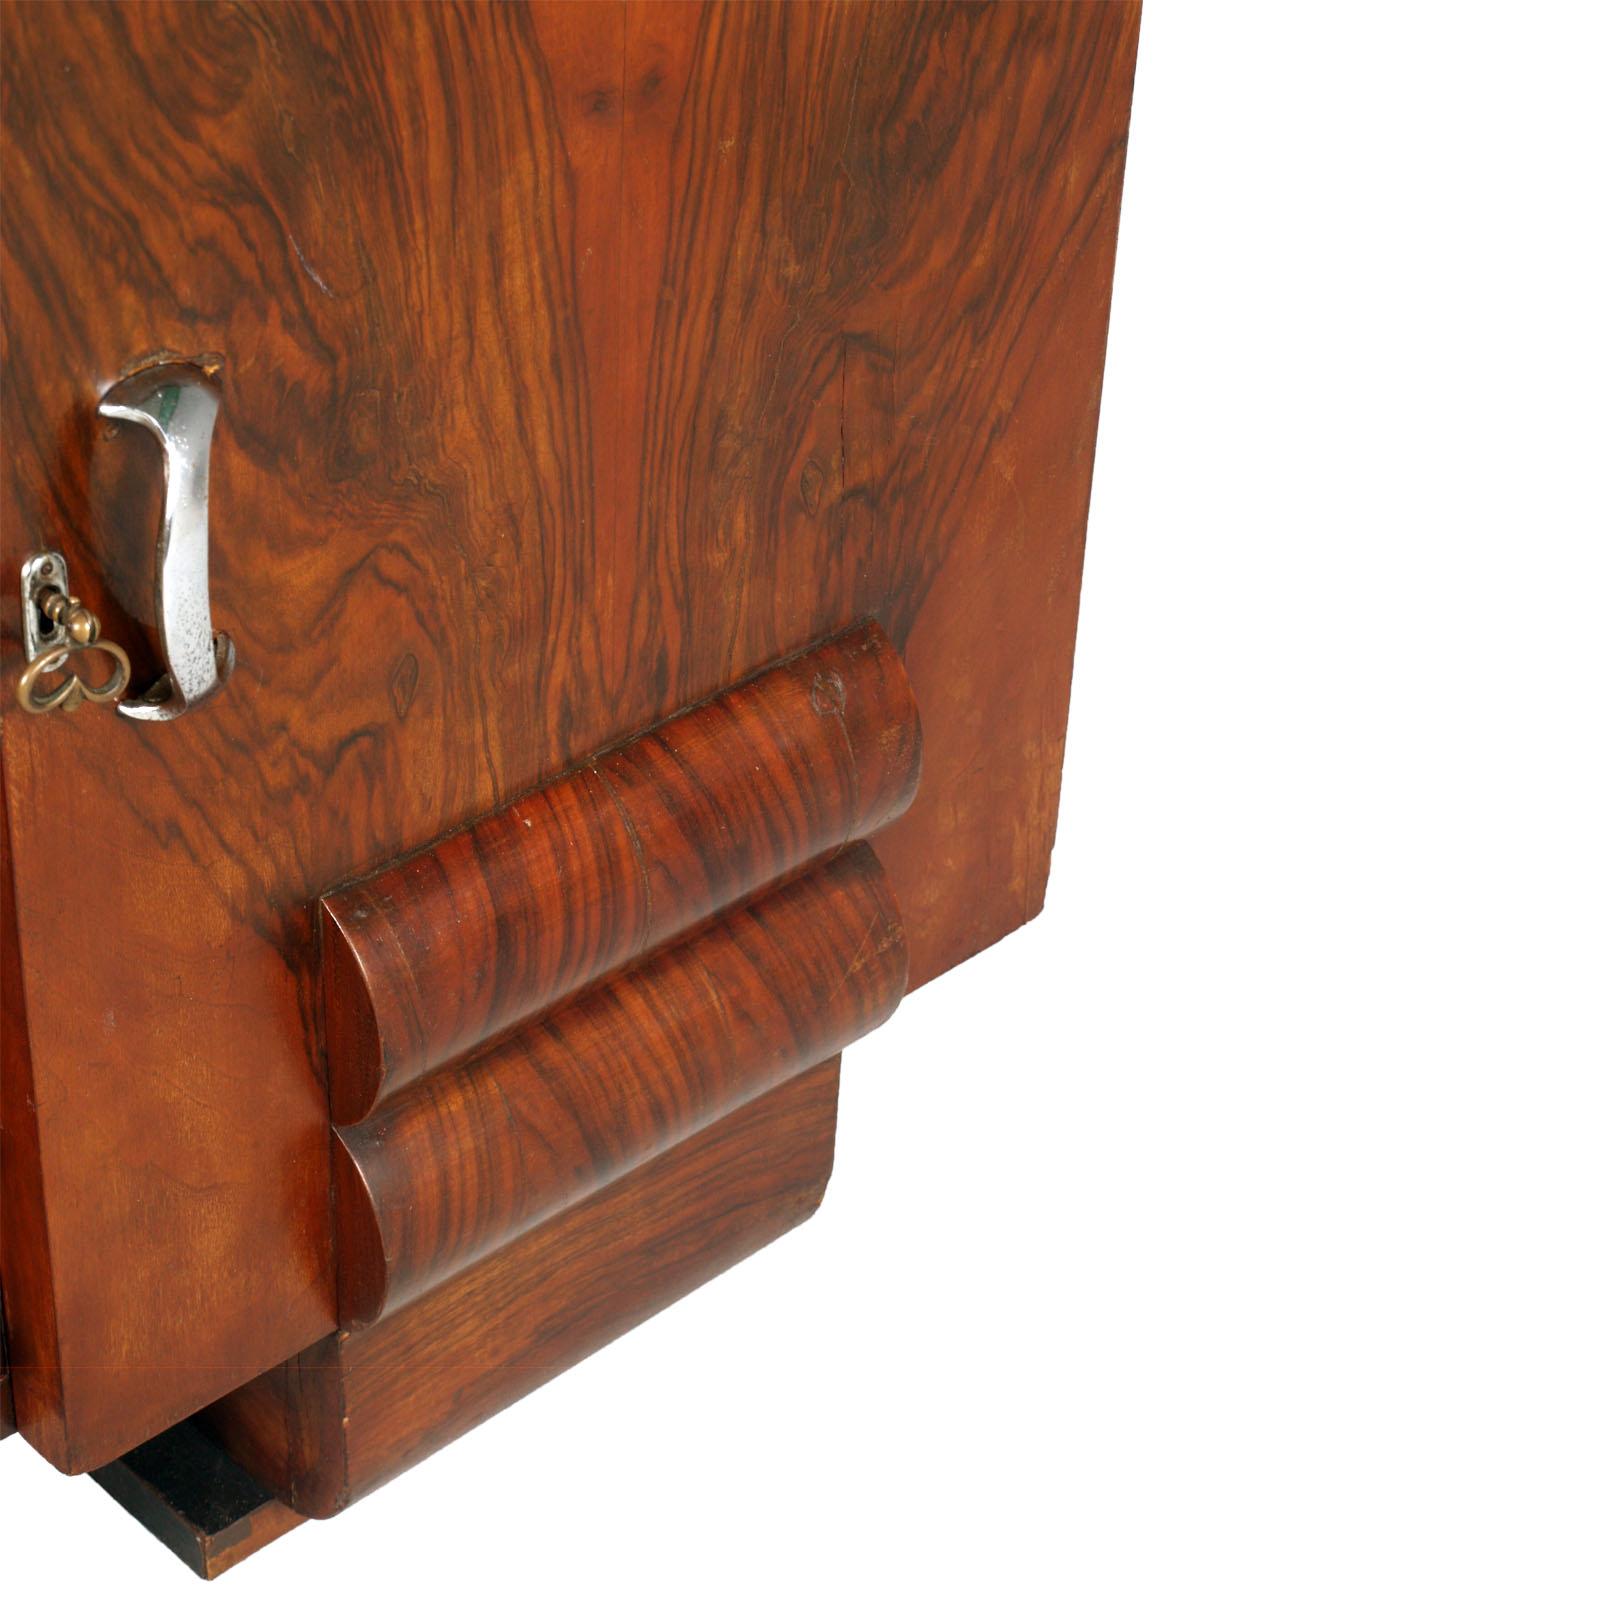 Burl 1930s Chest of Drawers, Commode, Credenza Art Deco by Guglielmo Urlich for Ar.Ca For Sale